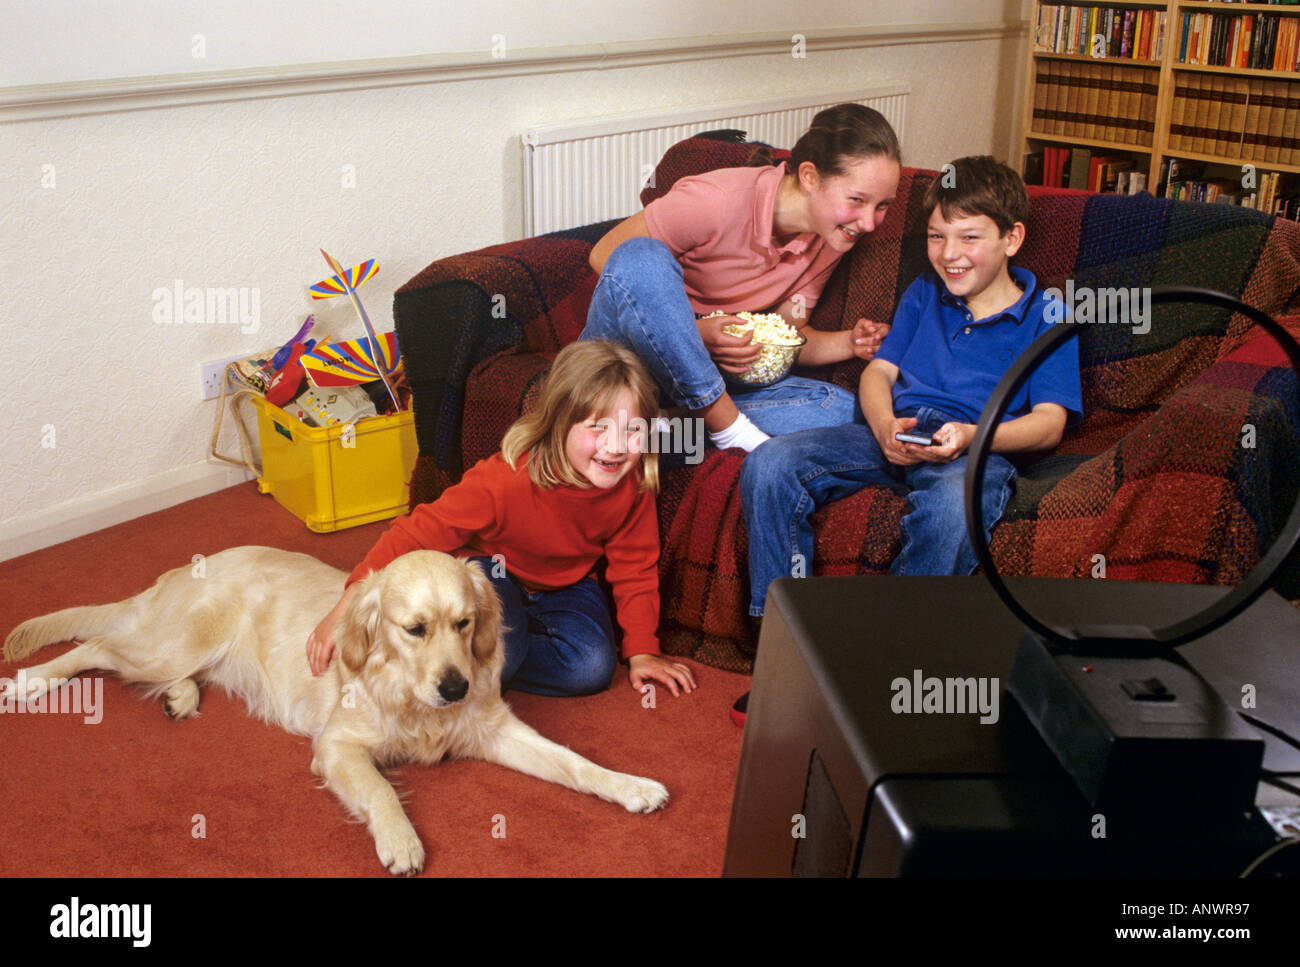 Two sisters and their brother happily watching small portable TV in their home play room with the family pet dog Stock Photo